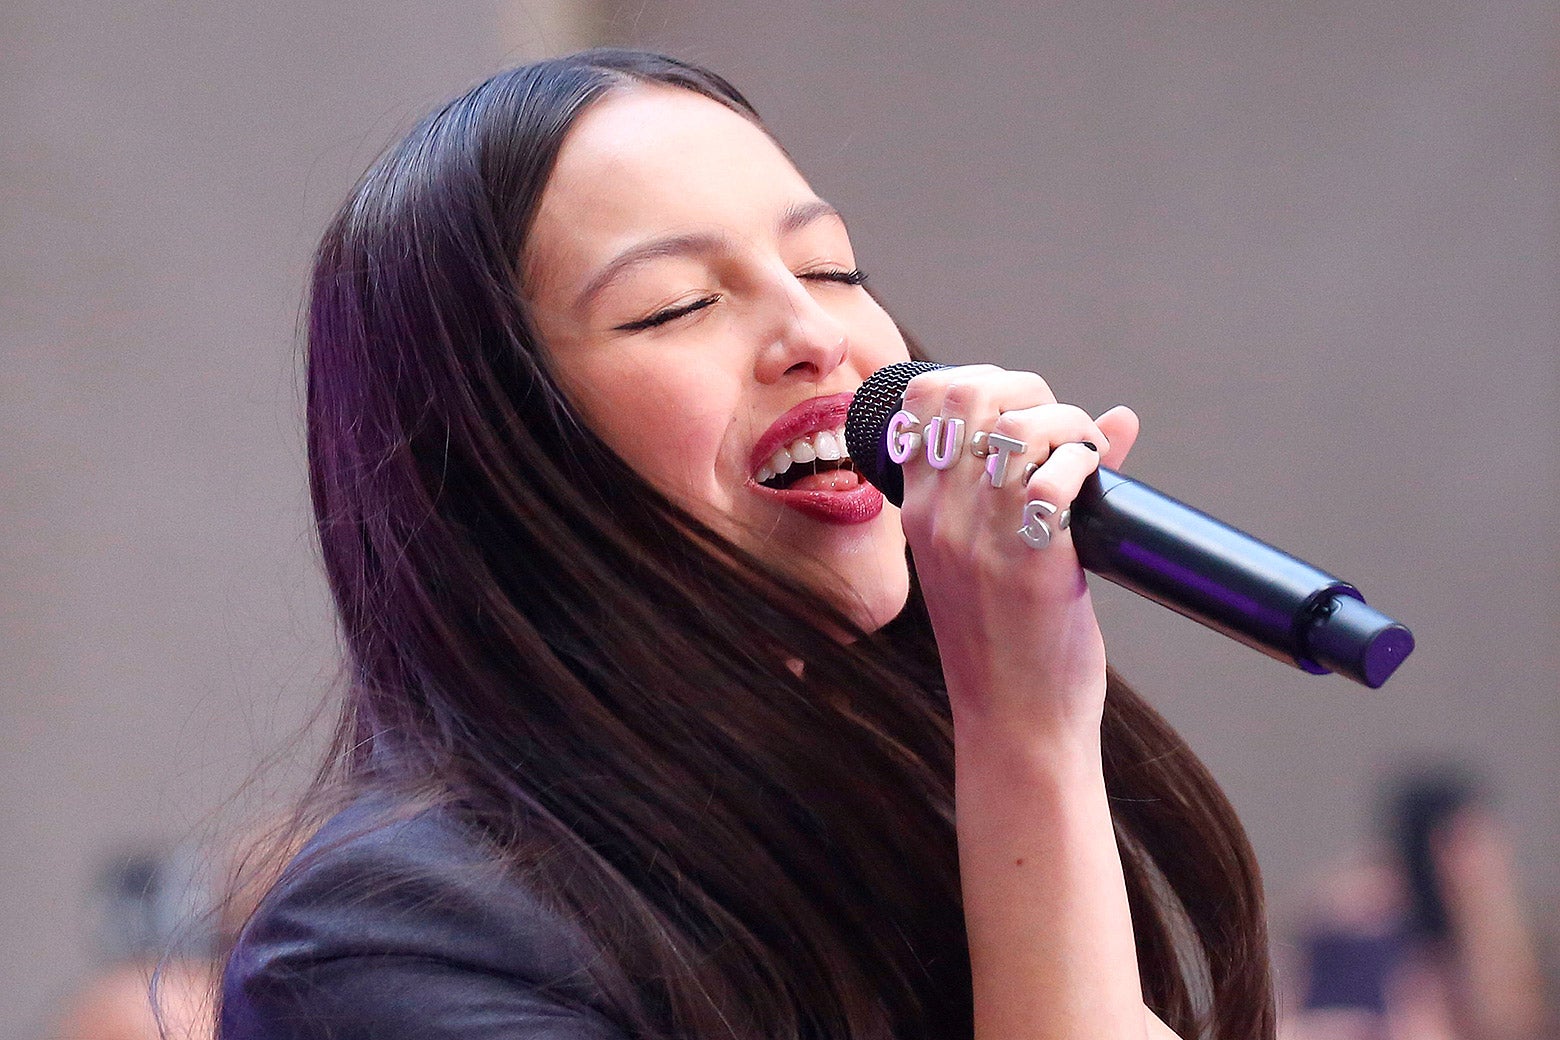 The young singer smiles as she closes her eyes and lifts a microphone to her lips, wearing red lipstick and her long dark hair in a center part.